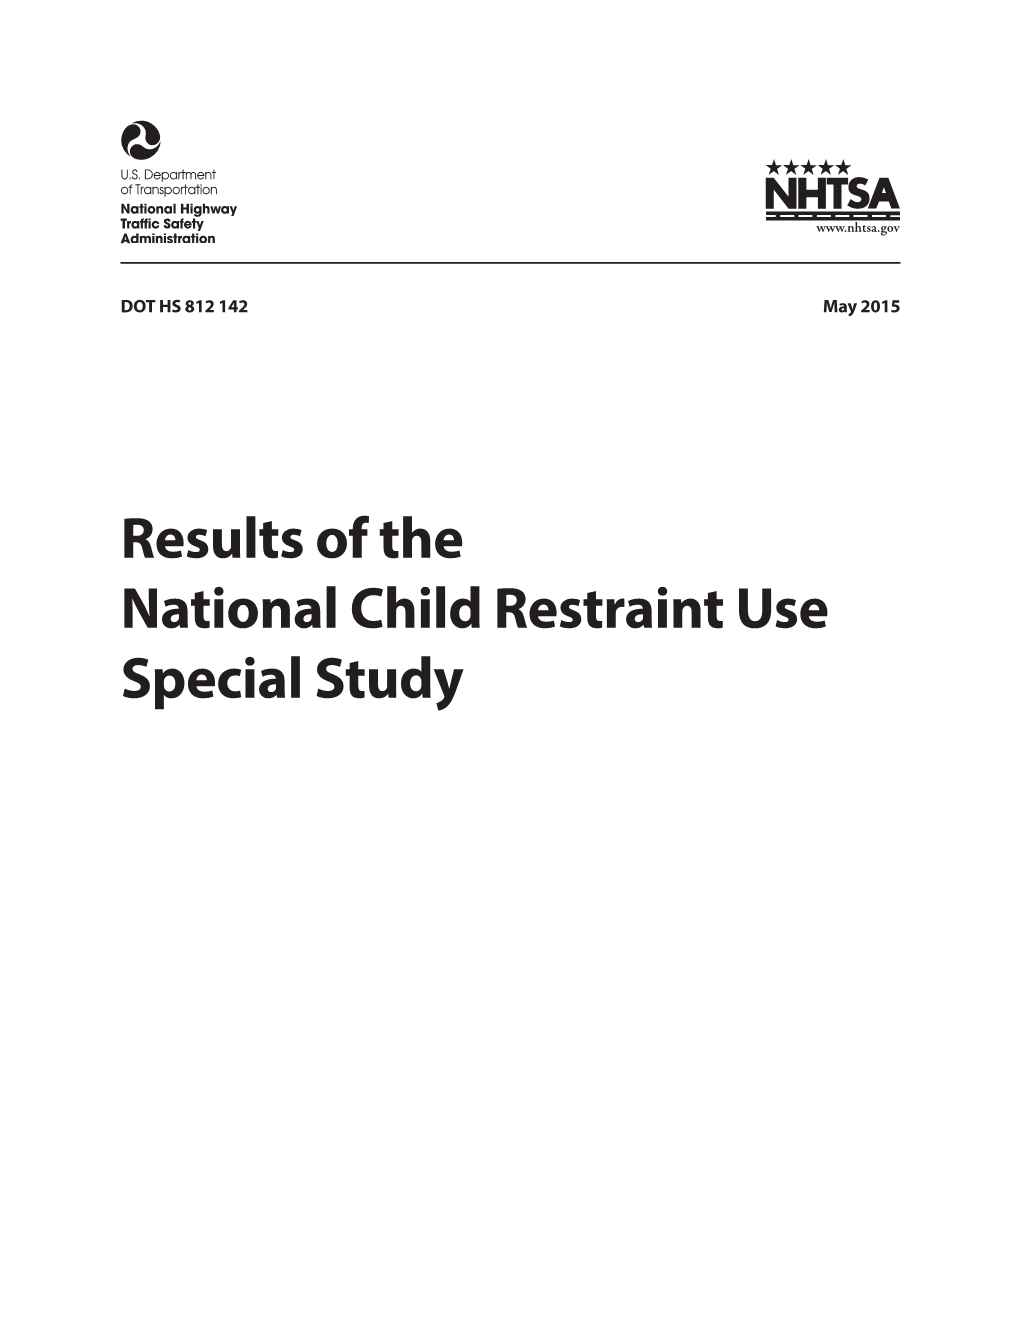 Results of the National Child Restraint Use Special Study